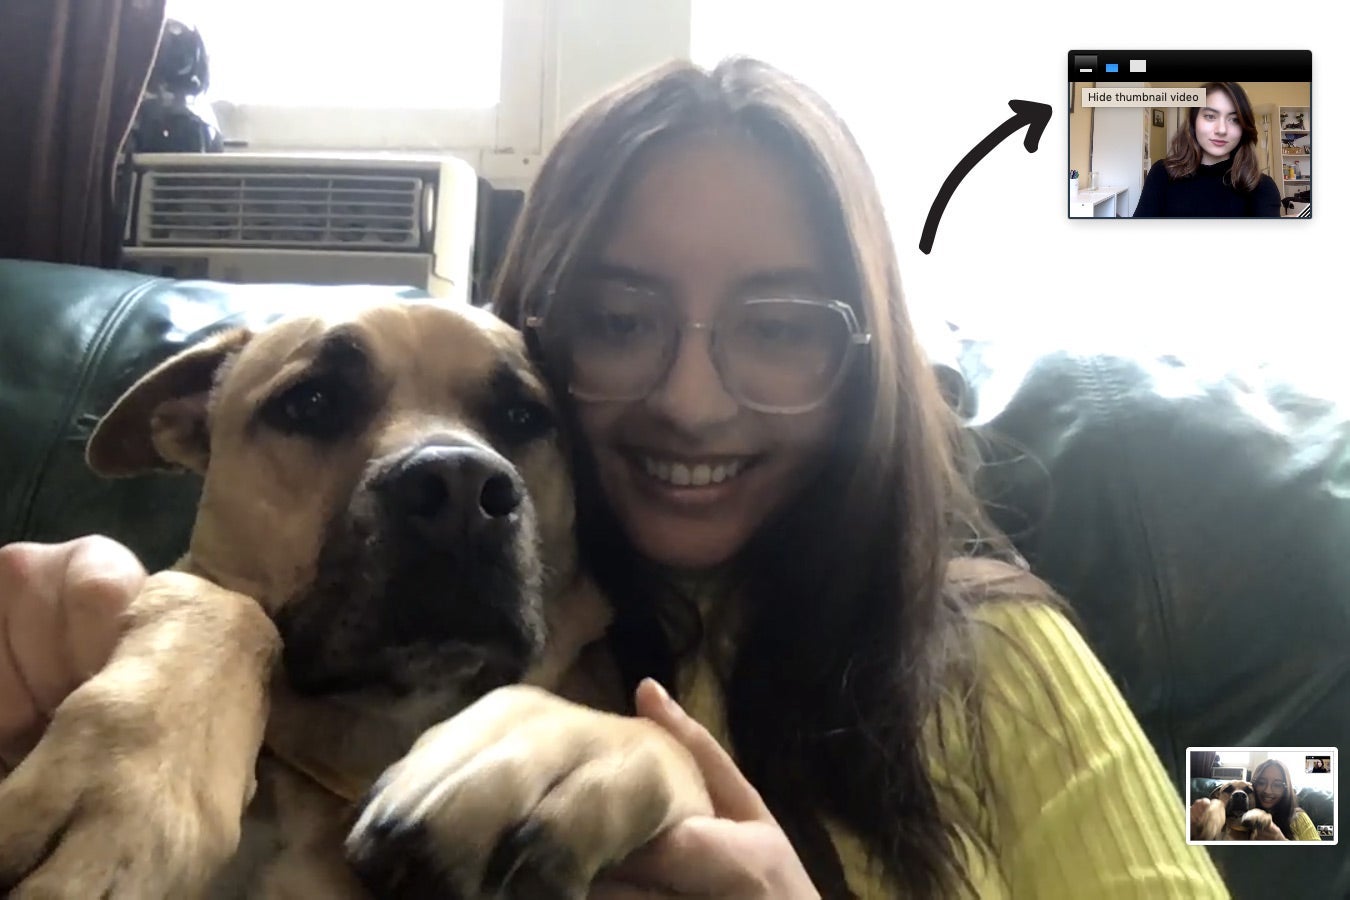 A woman holds up a dog on Zoom. An arrow points to the image of another user in the top right, with the option to "Hide thumbnail video."  